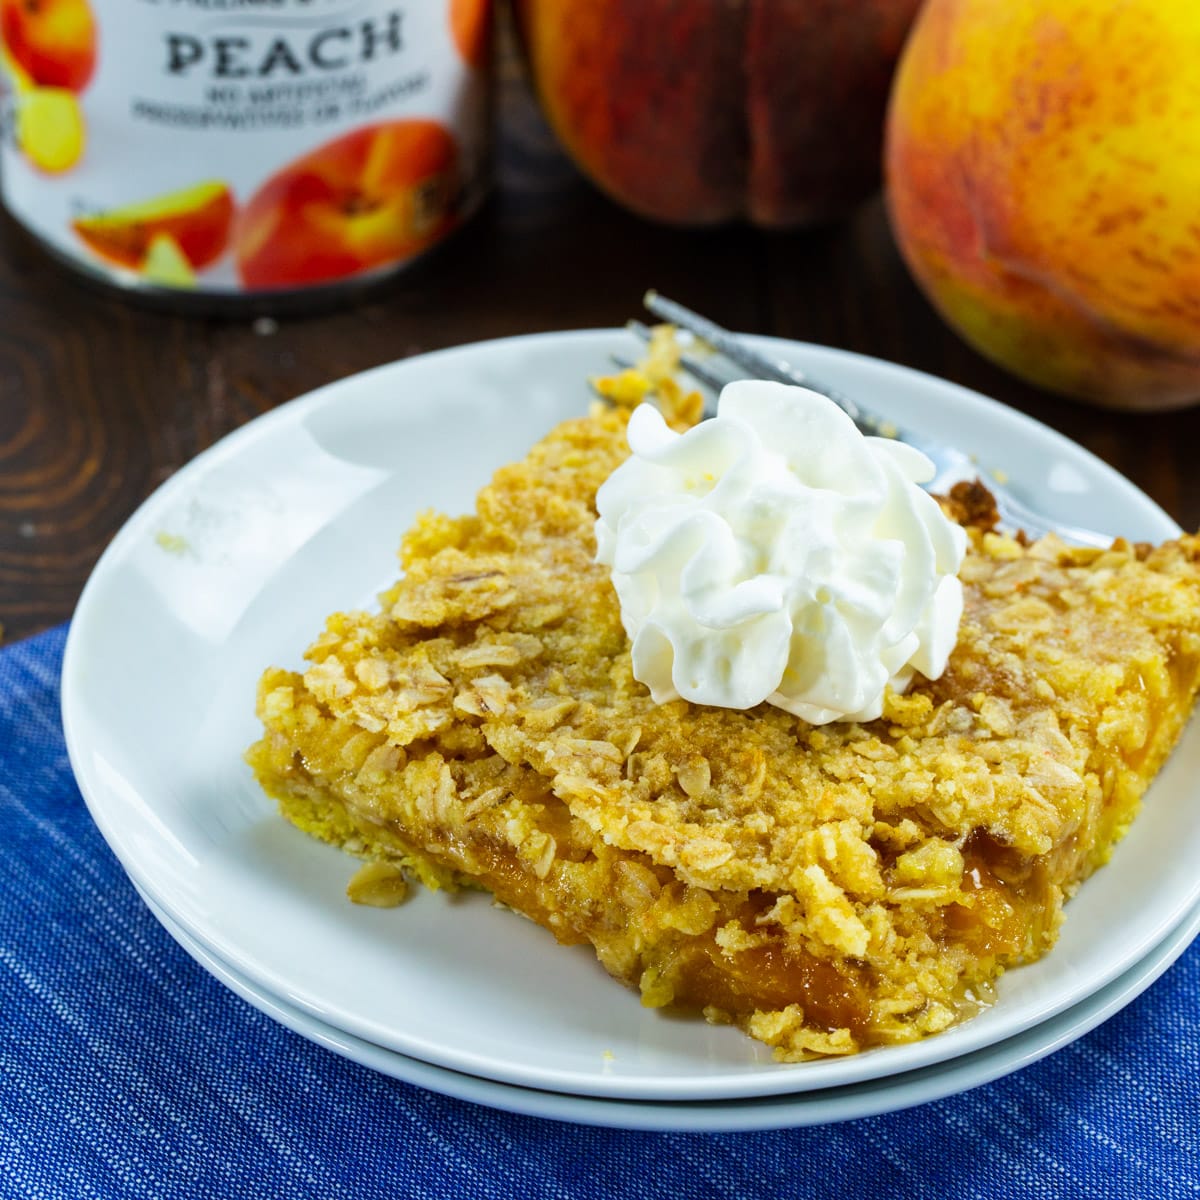 Peach Bar topped with whipped cream.